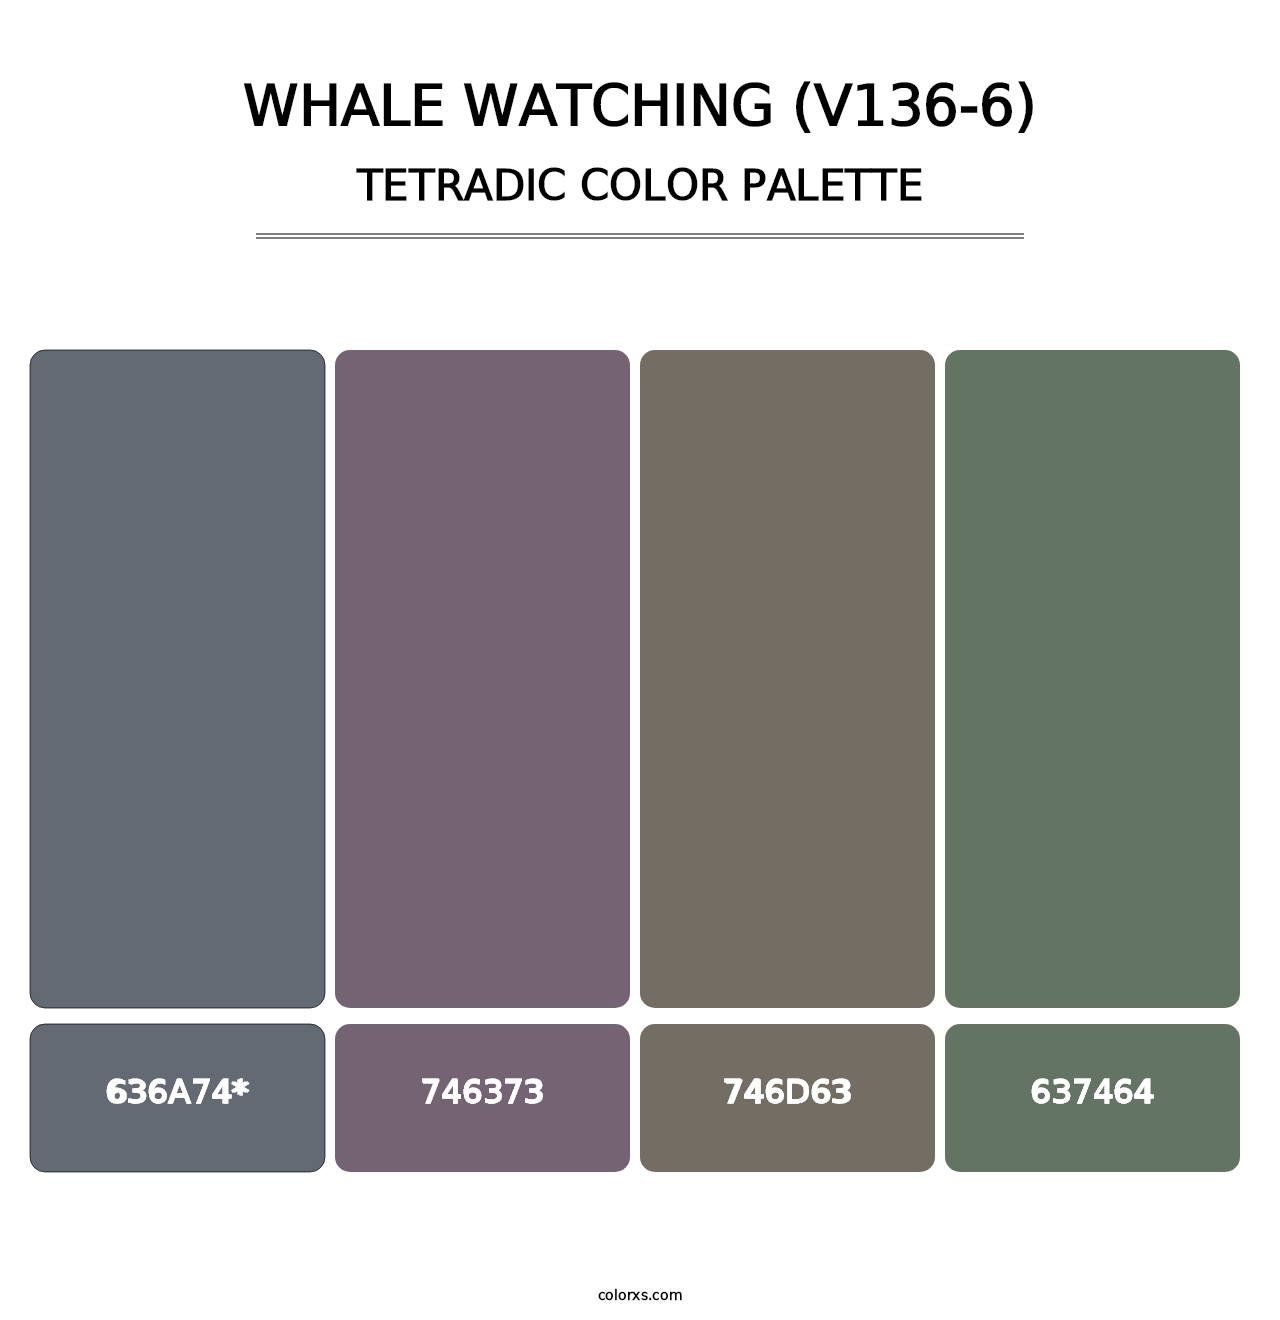 Whale Watching (V136-6) - Tetradic Color Palette